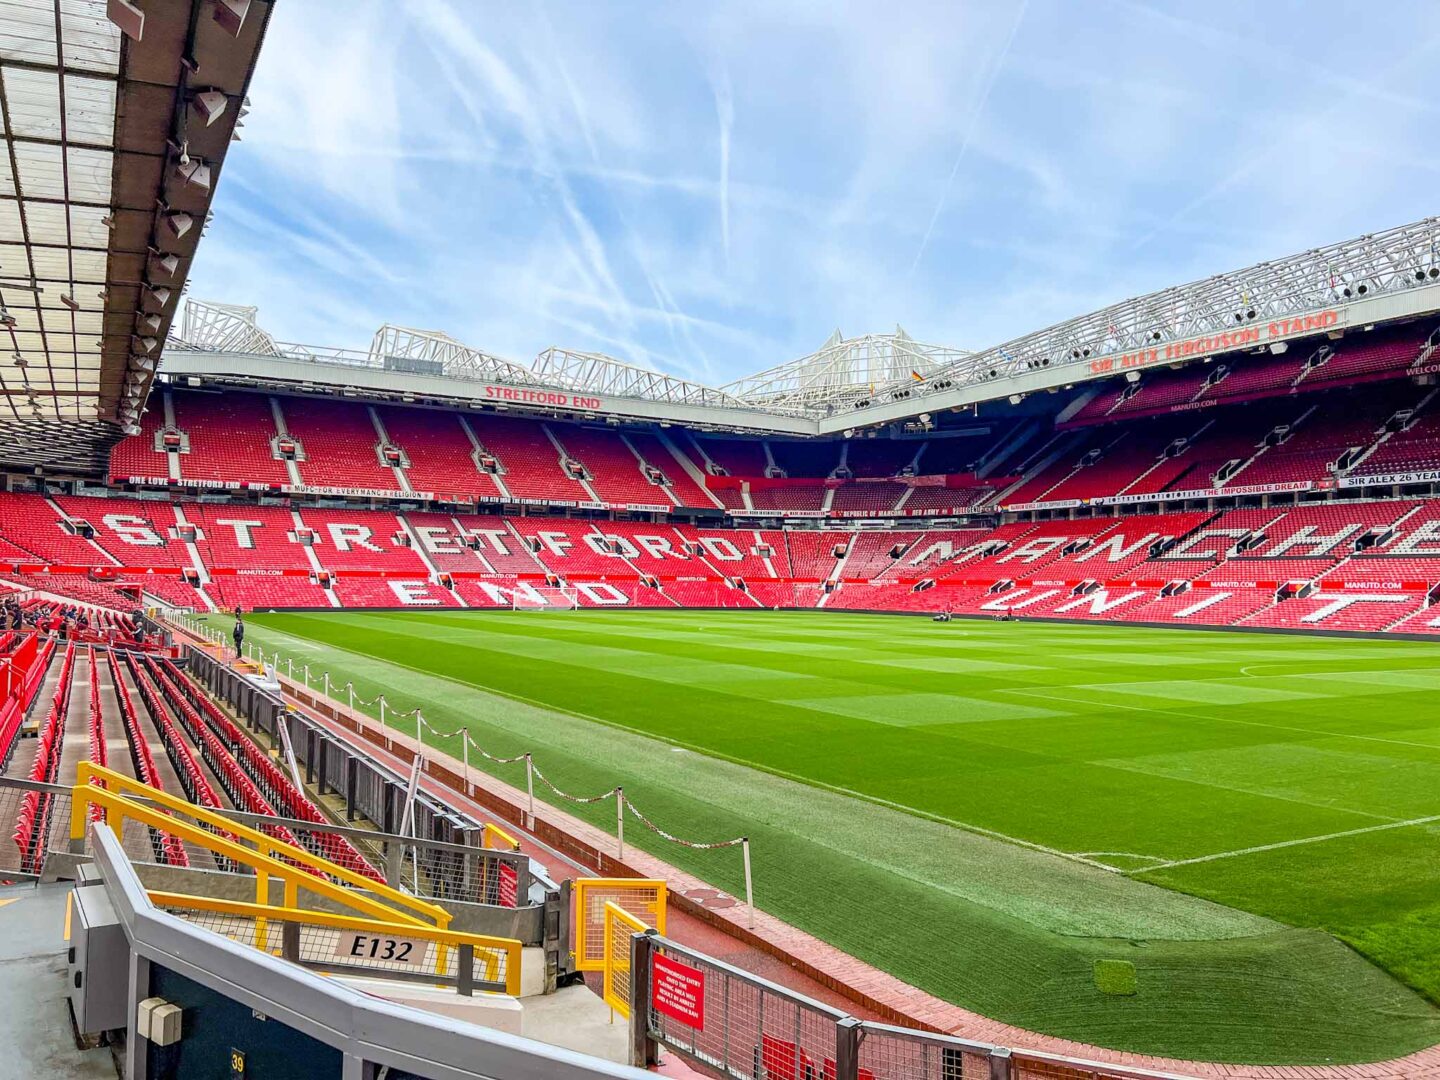 Things to do near Manchester Airport, Manchester United Stadium